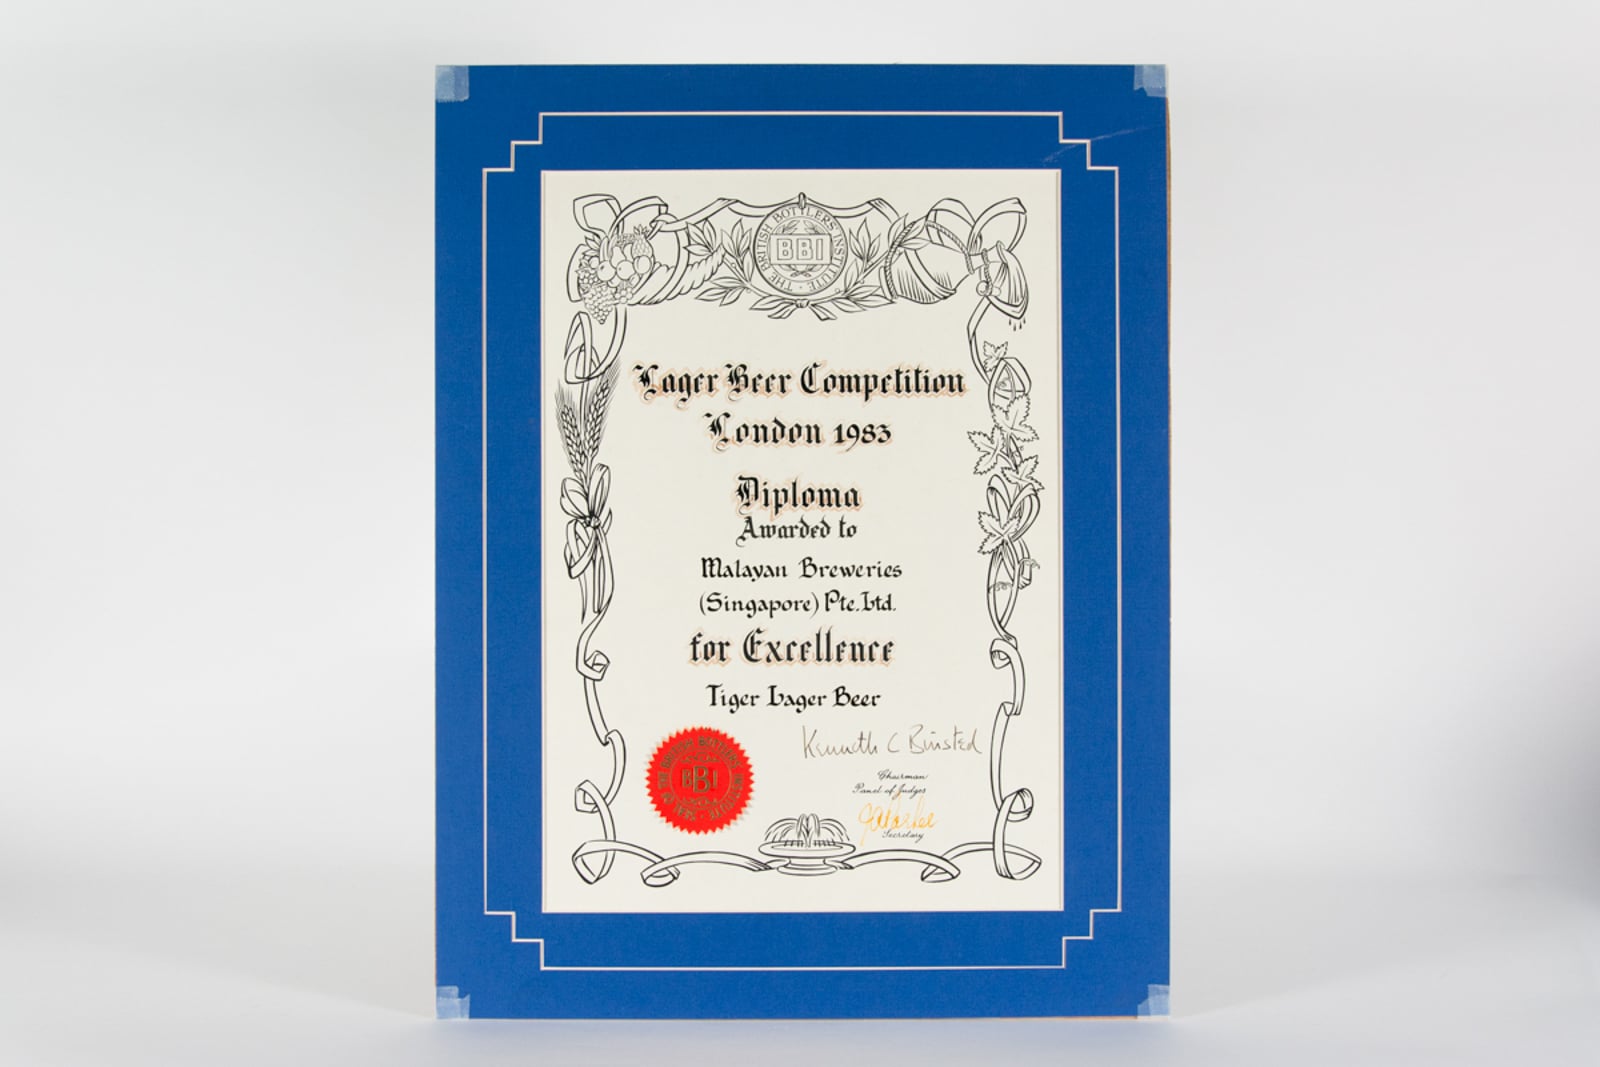 Tiger Lager Beer Diploma for Excellence Certificate 1983